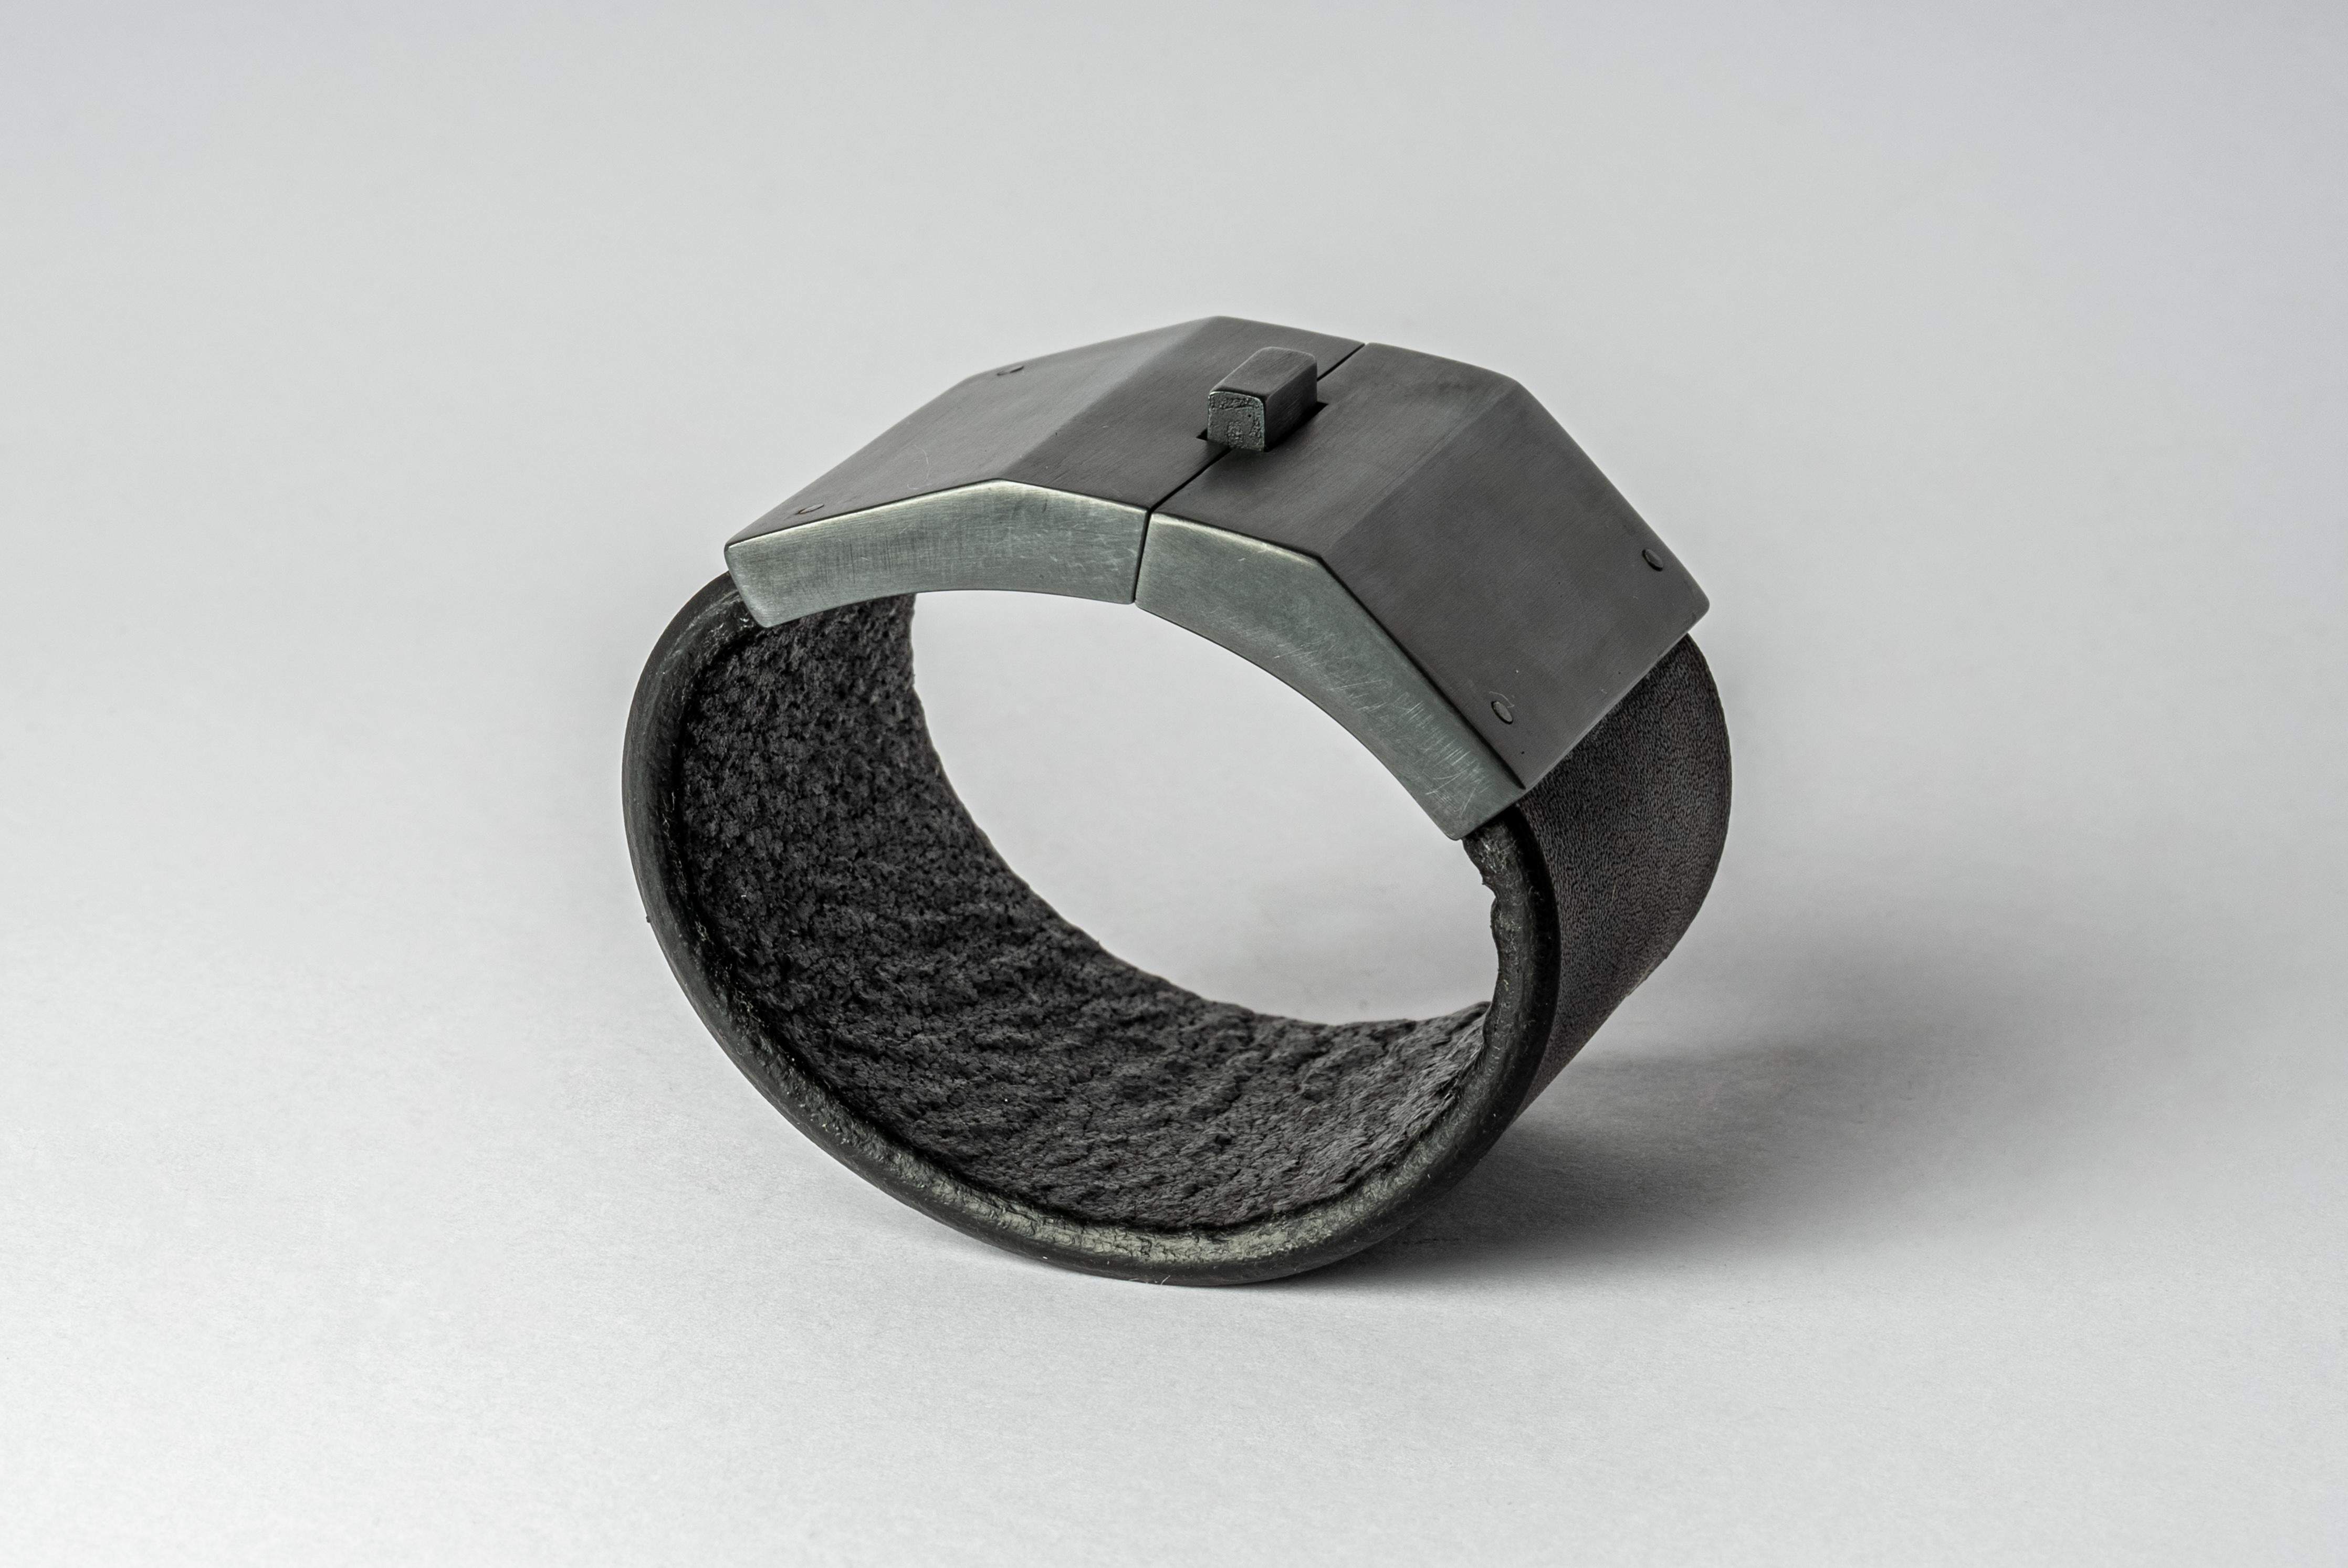 Bracelet in black buffalo leather and black sterling. Black sterling is a surface oxidation of sterling silver. This finish may fade over time, which can be considered an enhancement.